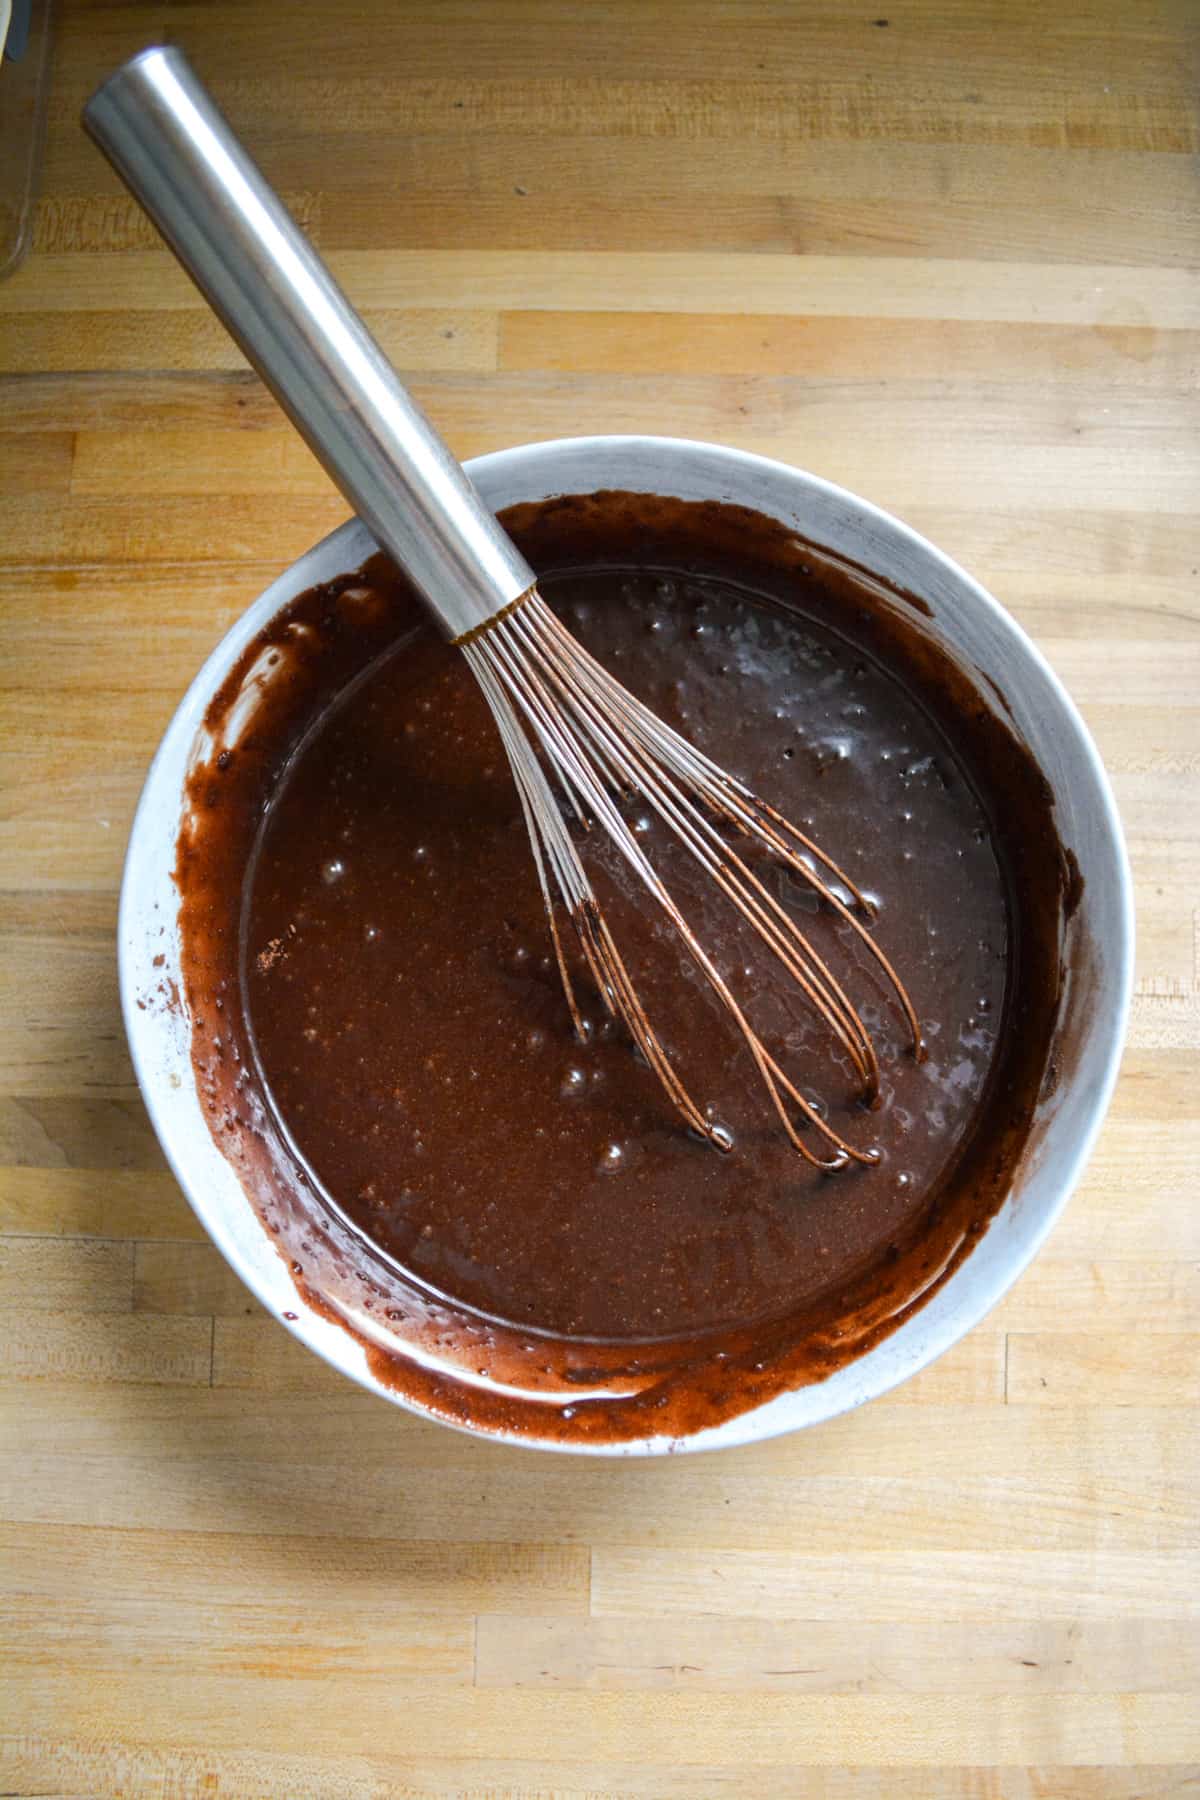 Vegan Gluten Free Chocolate Cake batter mixed together in a mixing bowl. There is a metal whisk in the bowl.